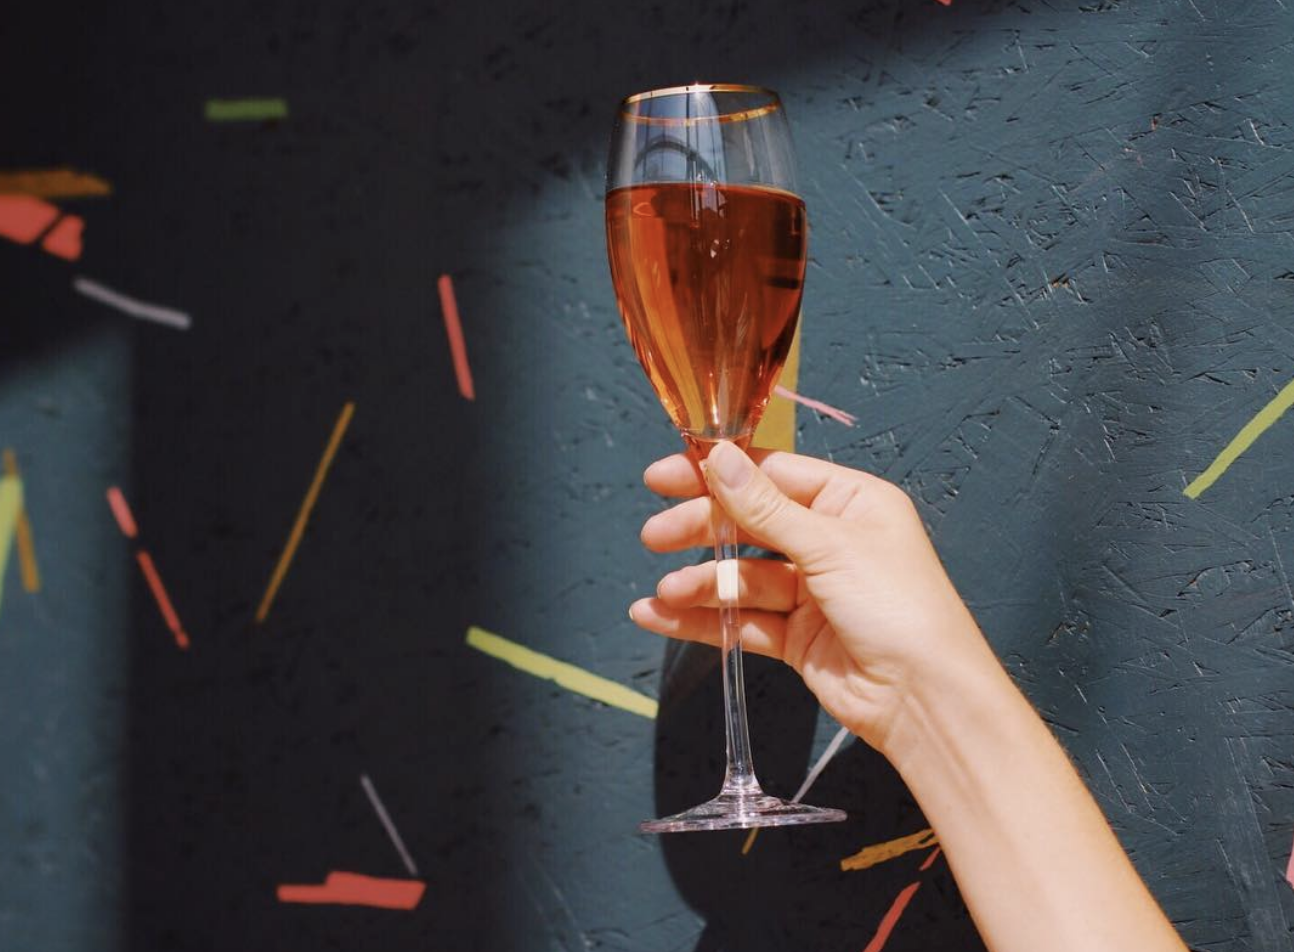 Woman's hand with painted nails holding up a champagne flute of rosé champagne in front of a dark painted wall